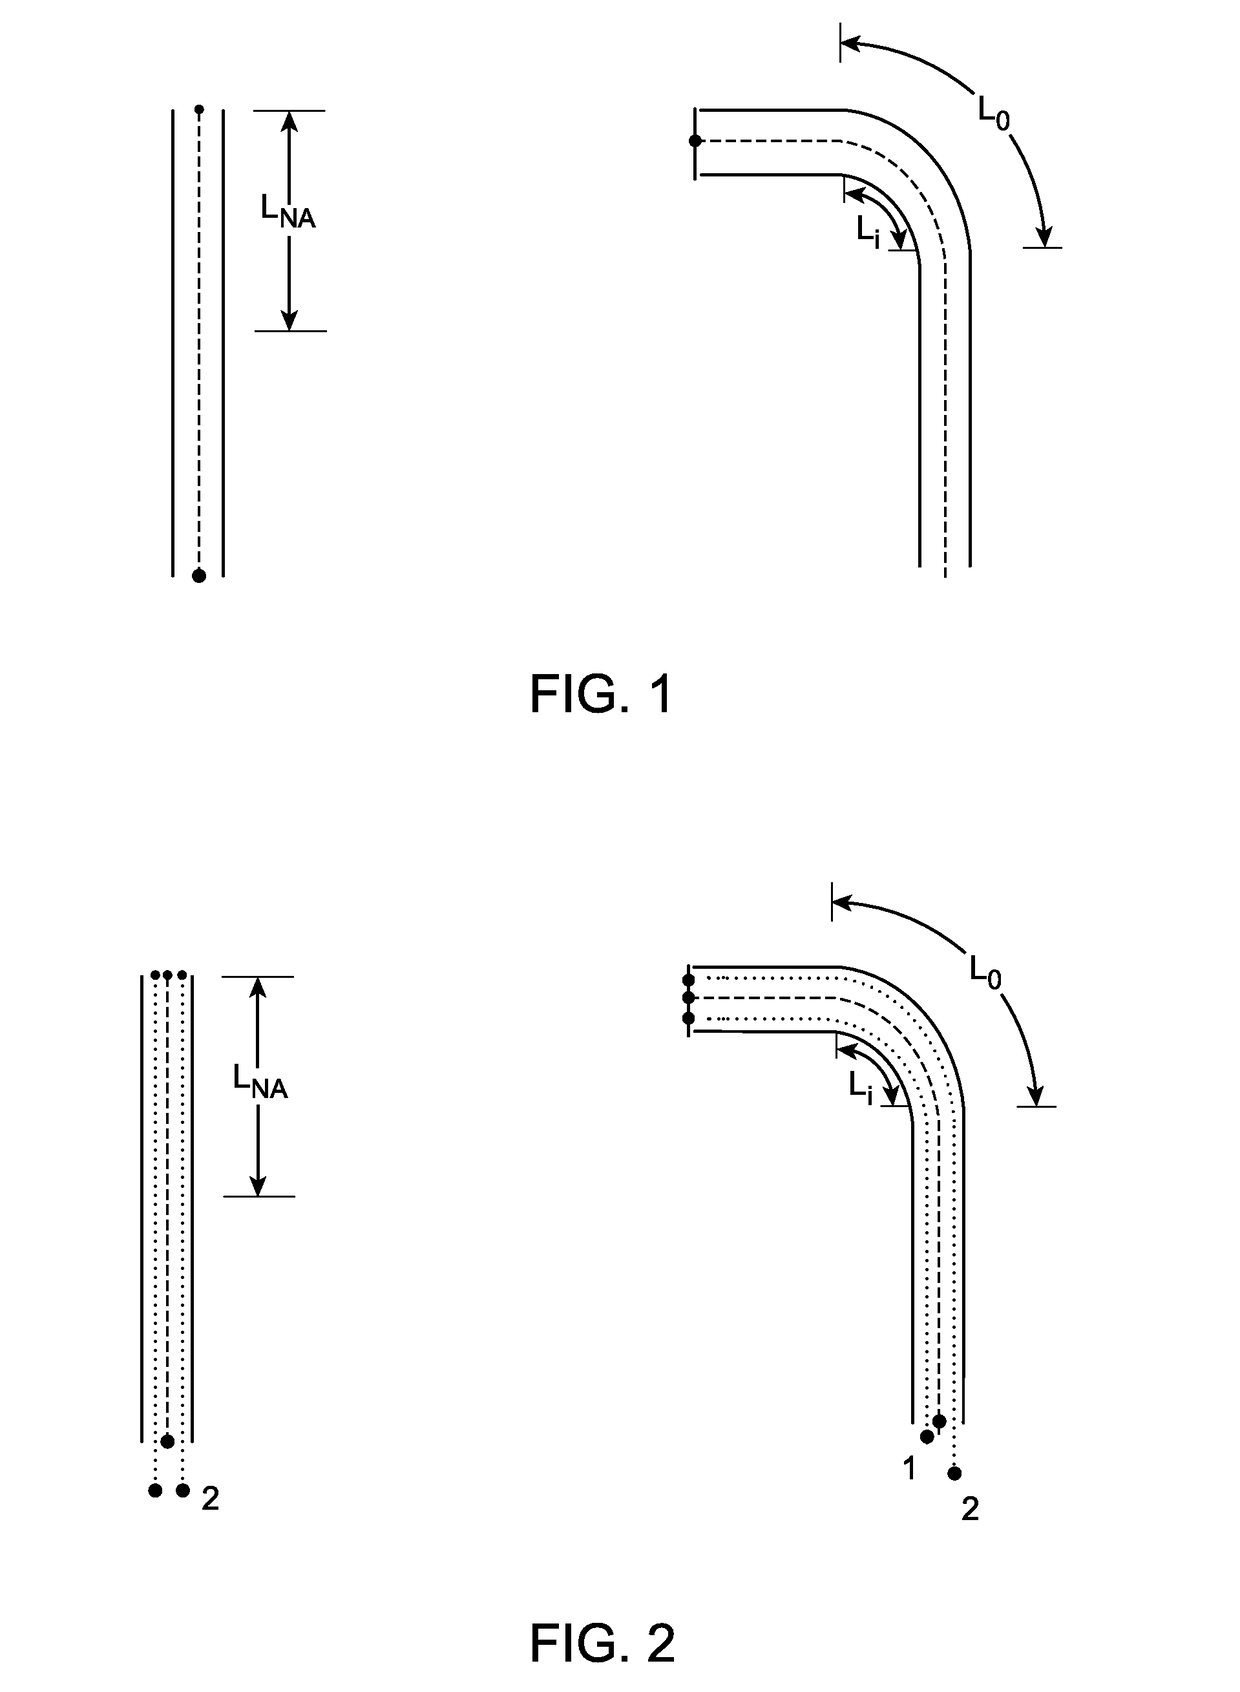 Method, apparatus, and a system for facilitating bending of an instrument in a surgical or medical robotic environment